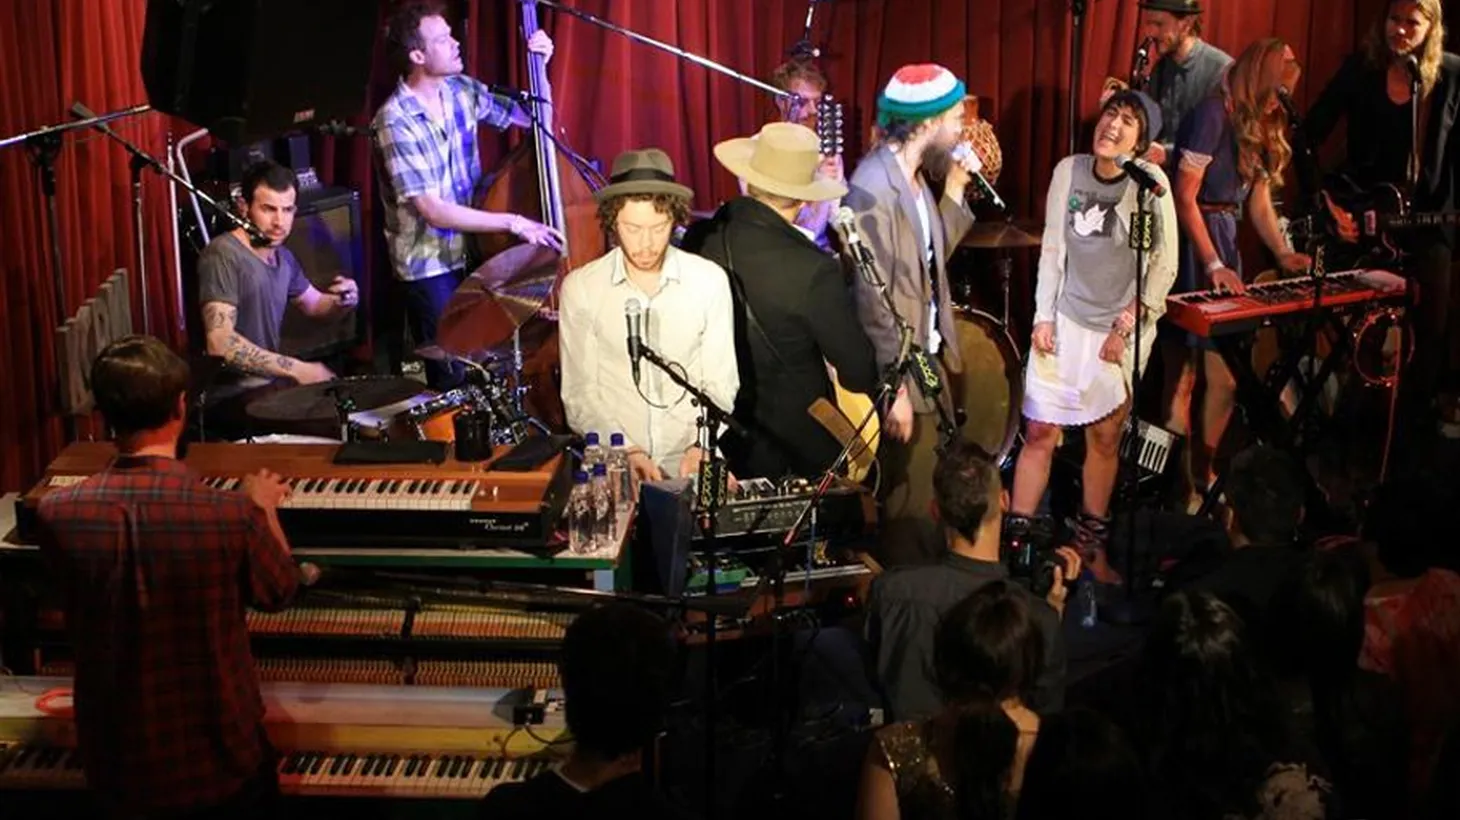 A live session with LA's own Edward Sharpe and the Magnetic Zeros, recorded in front of a live audience at KCRW's Apogee Sessions. Hosted by Liza Richardson.